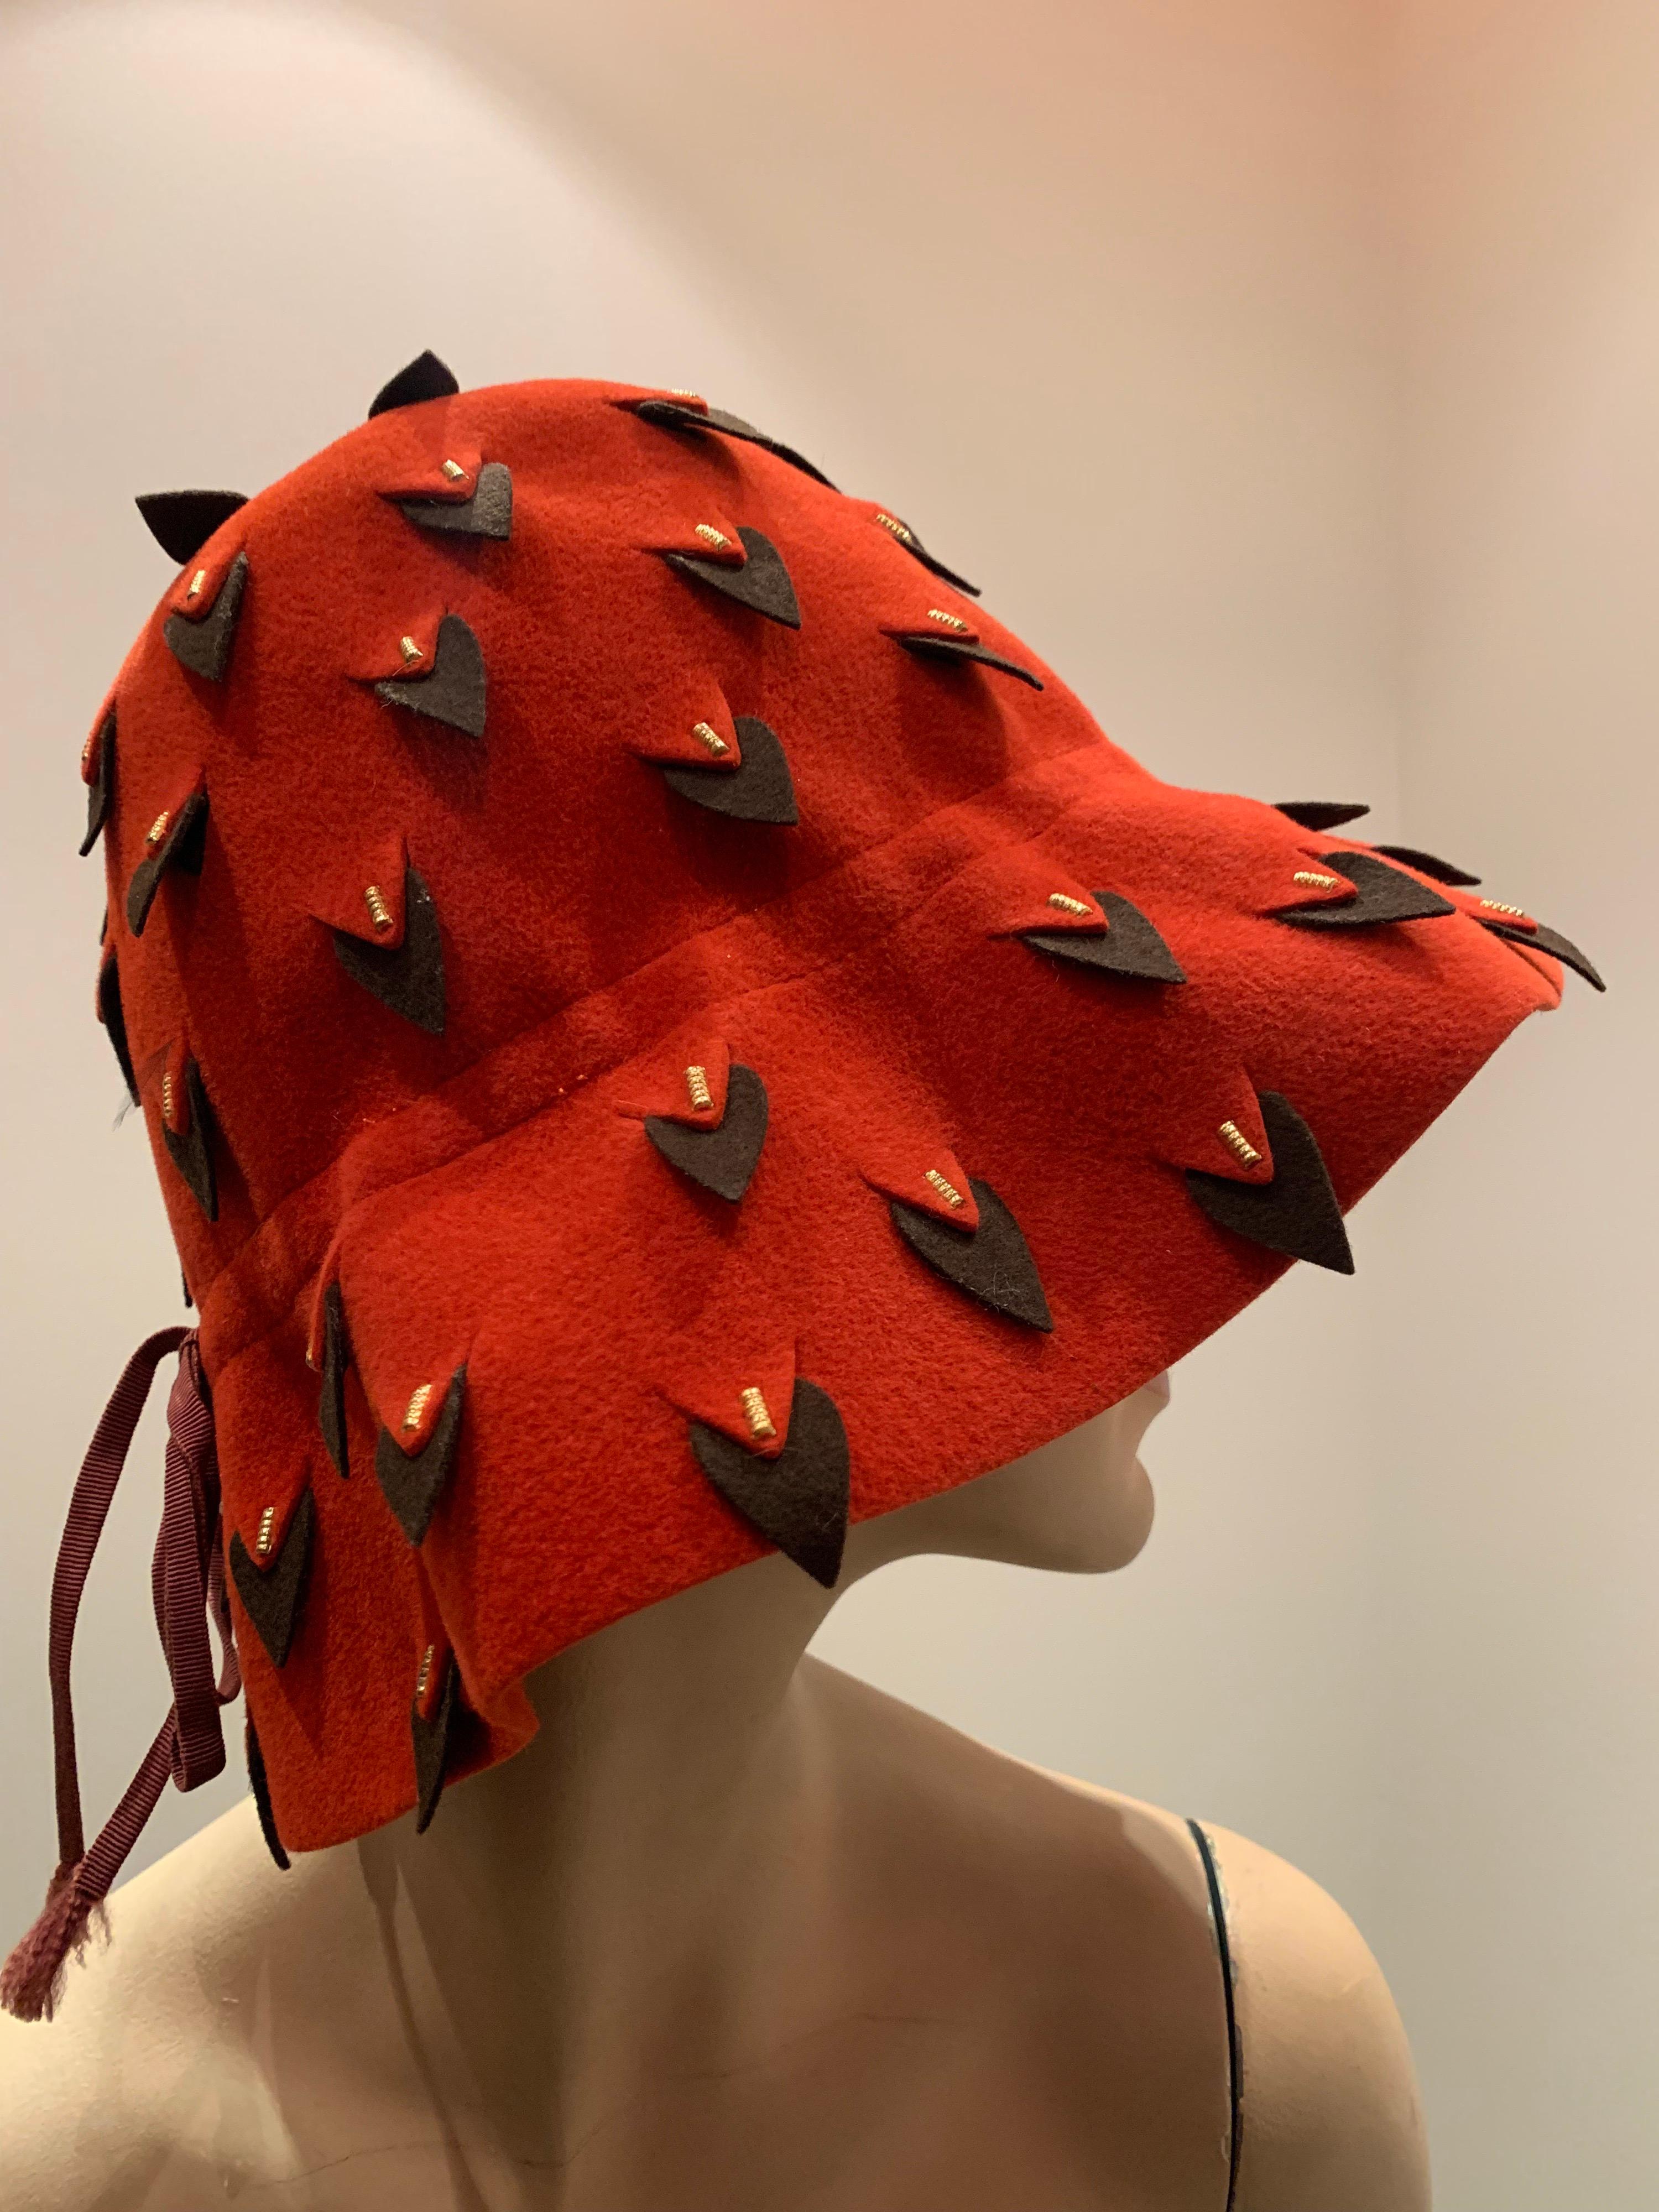 A smart 1960s Yves Saint Laurent cinnabar wool felt bucket hat with graphic black abstract vented surface cuts throughout that resemble ermine tails. A narrow black hatband is tied in a bow. Contrasting signature YSL turquoise blue grosgrain hatband